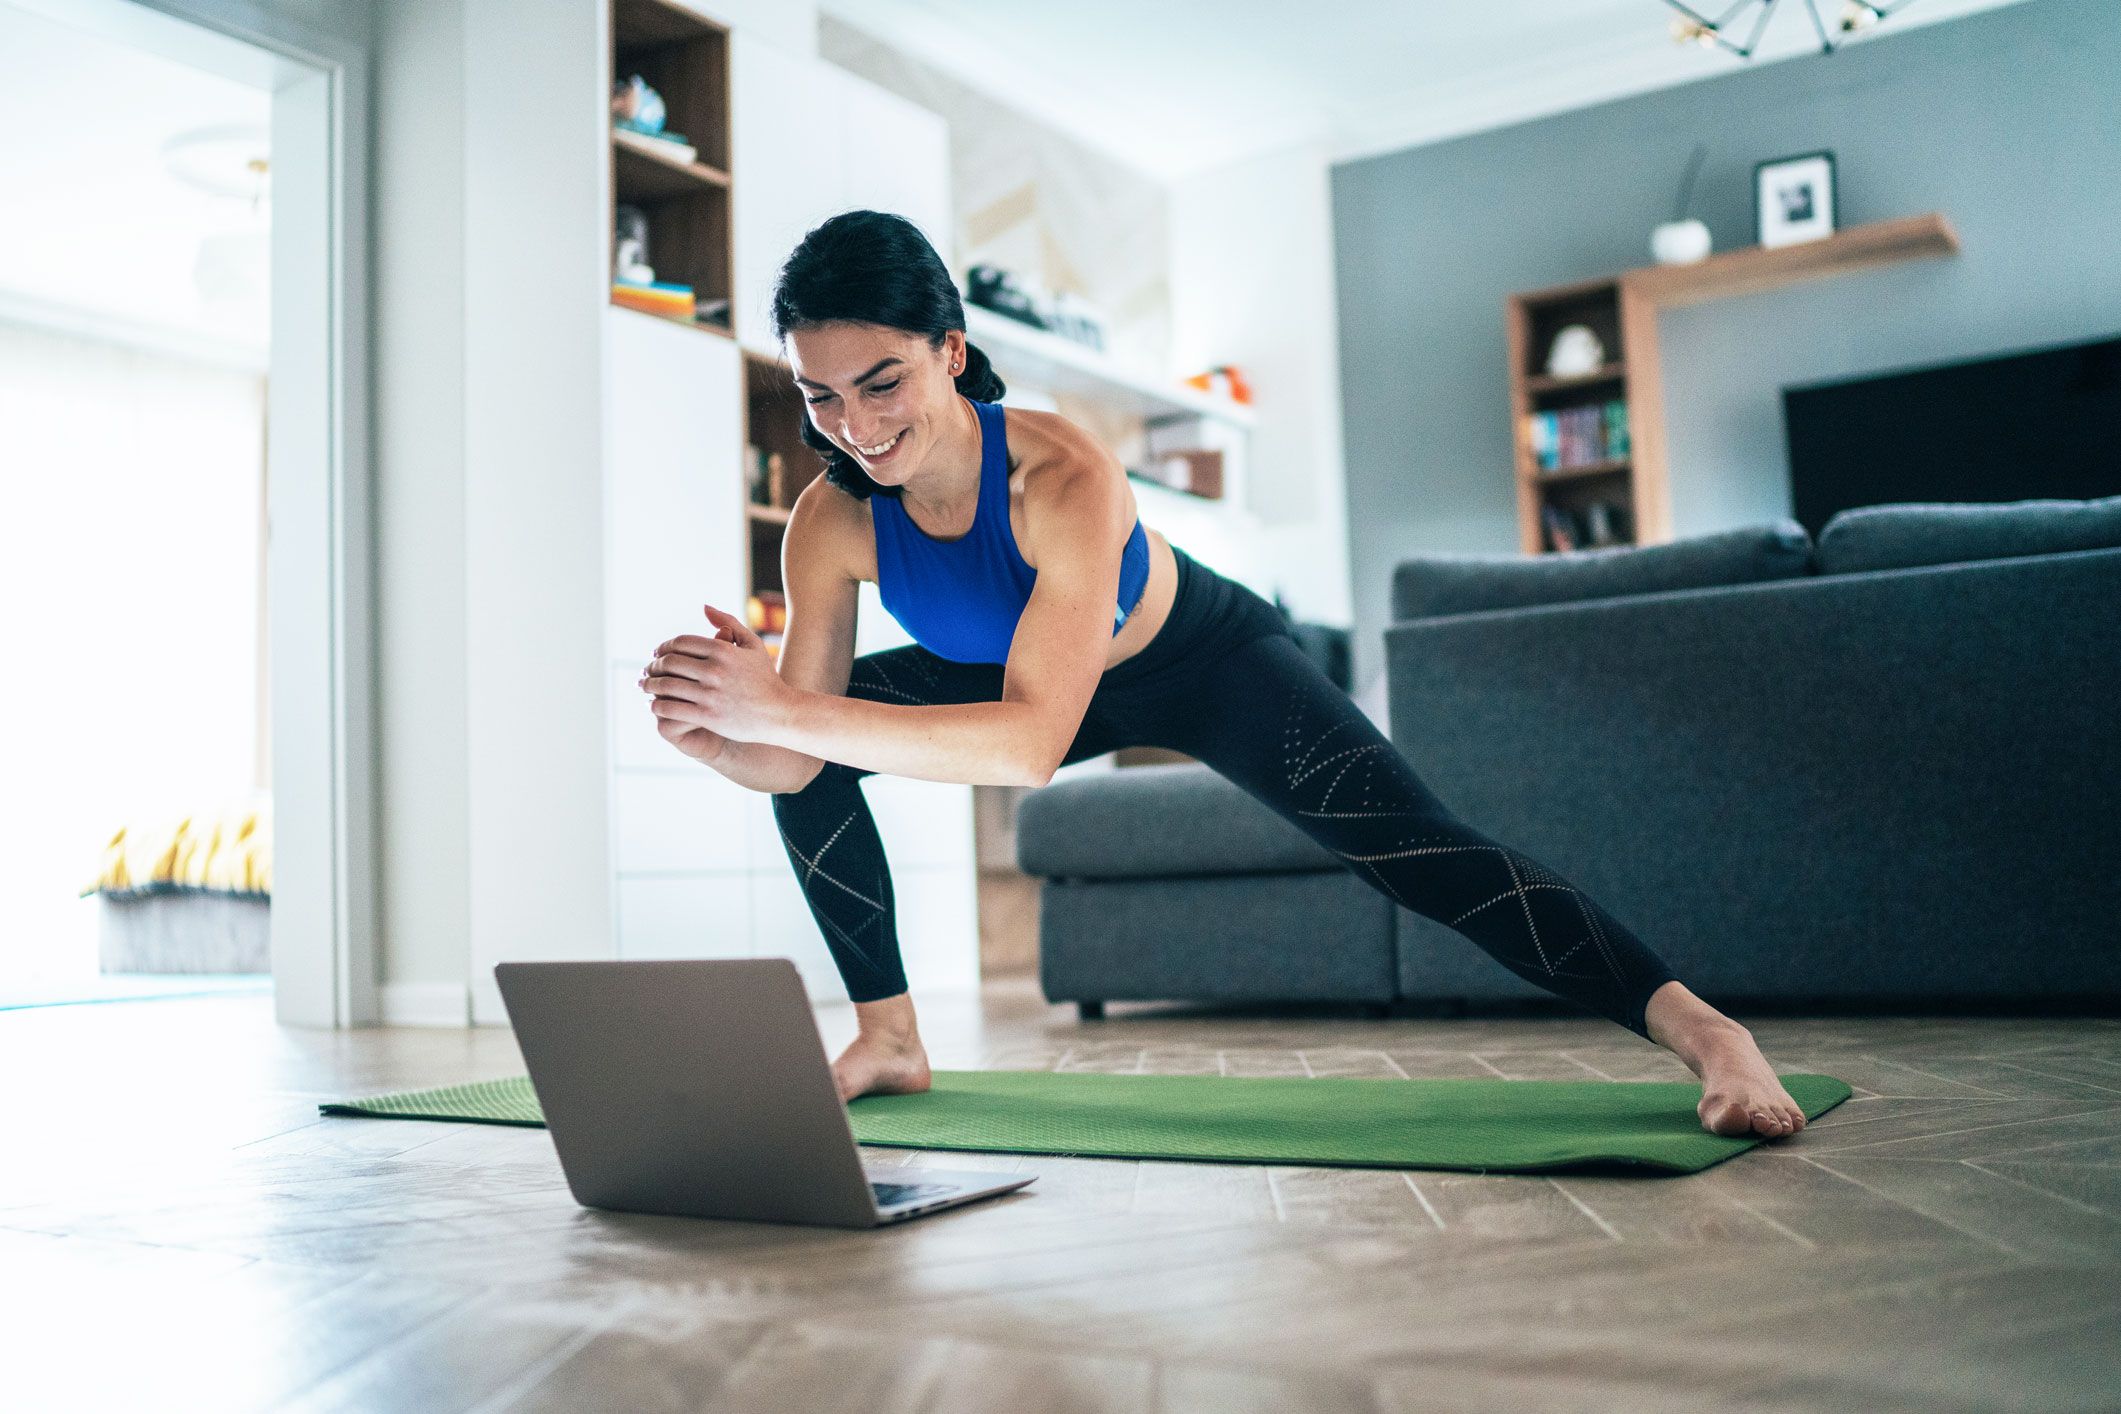 30 Pilates Videos To Stream For Free